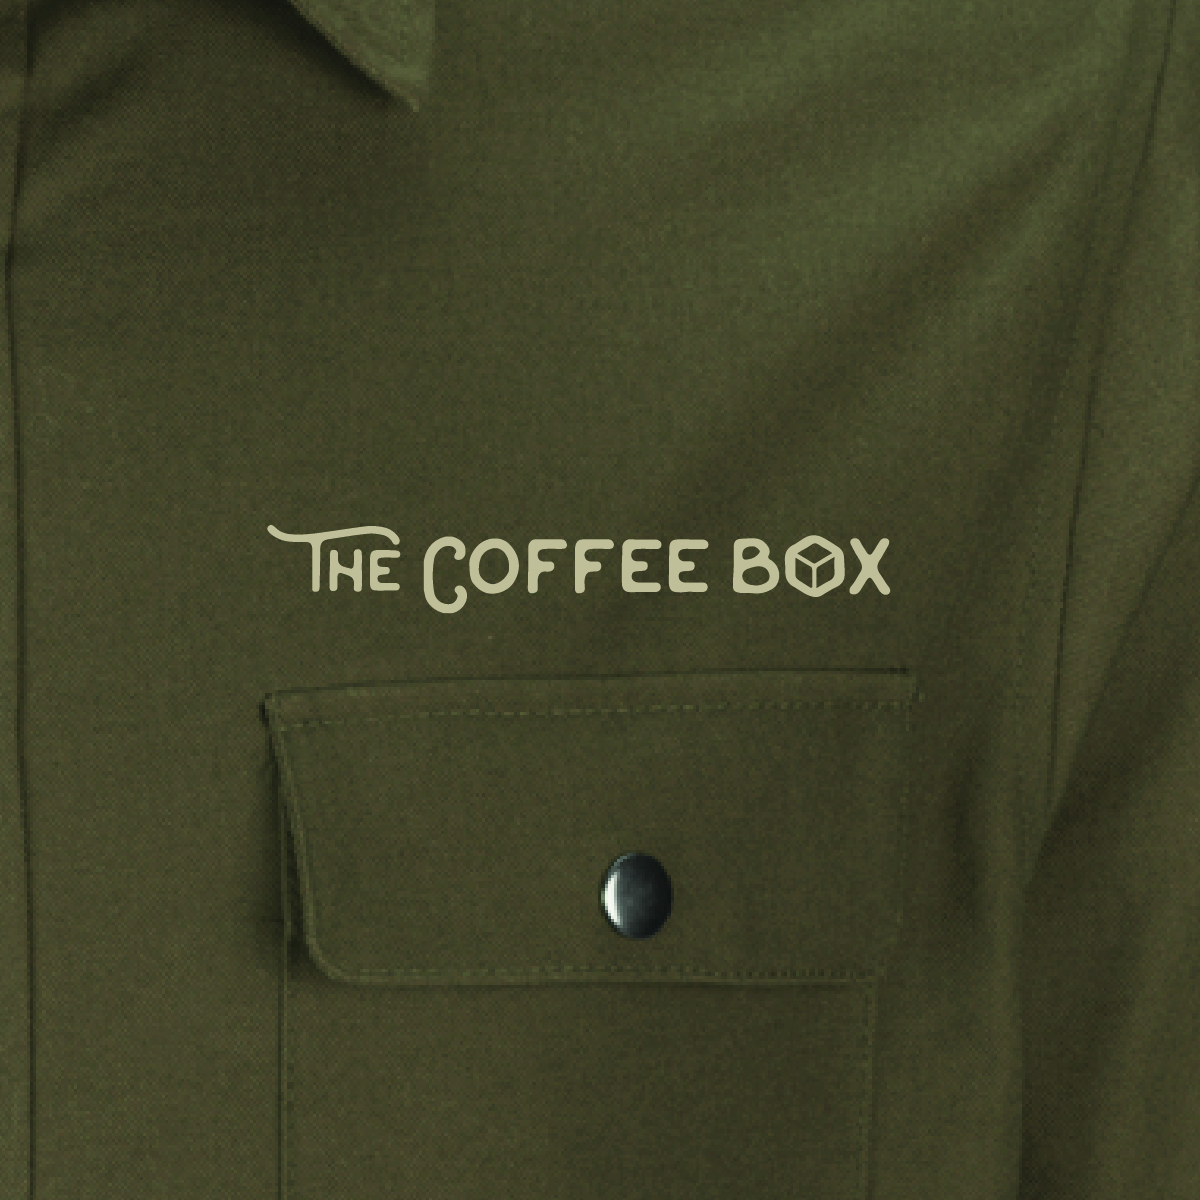 The Coffee Box text embroidery 